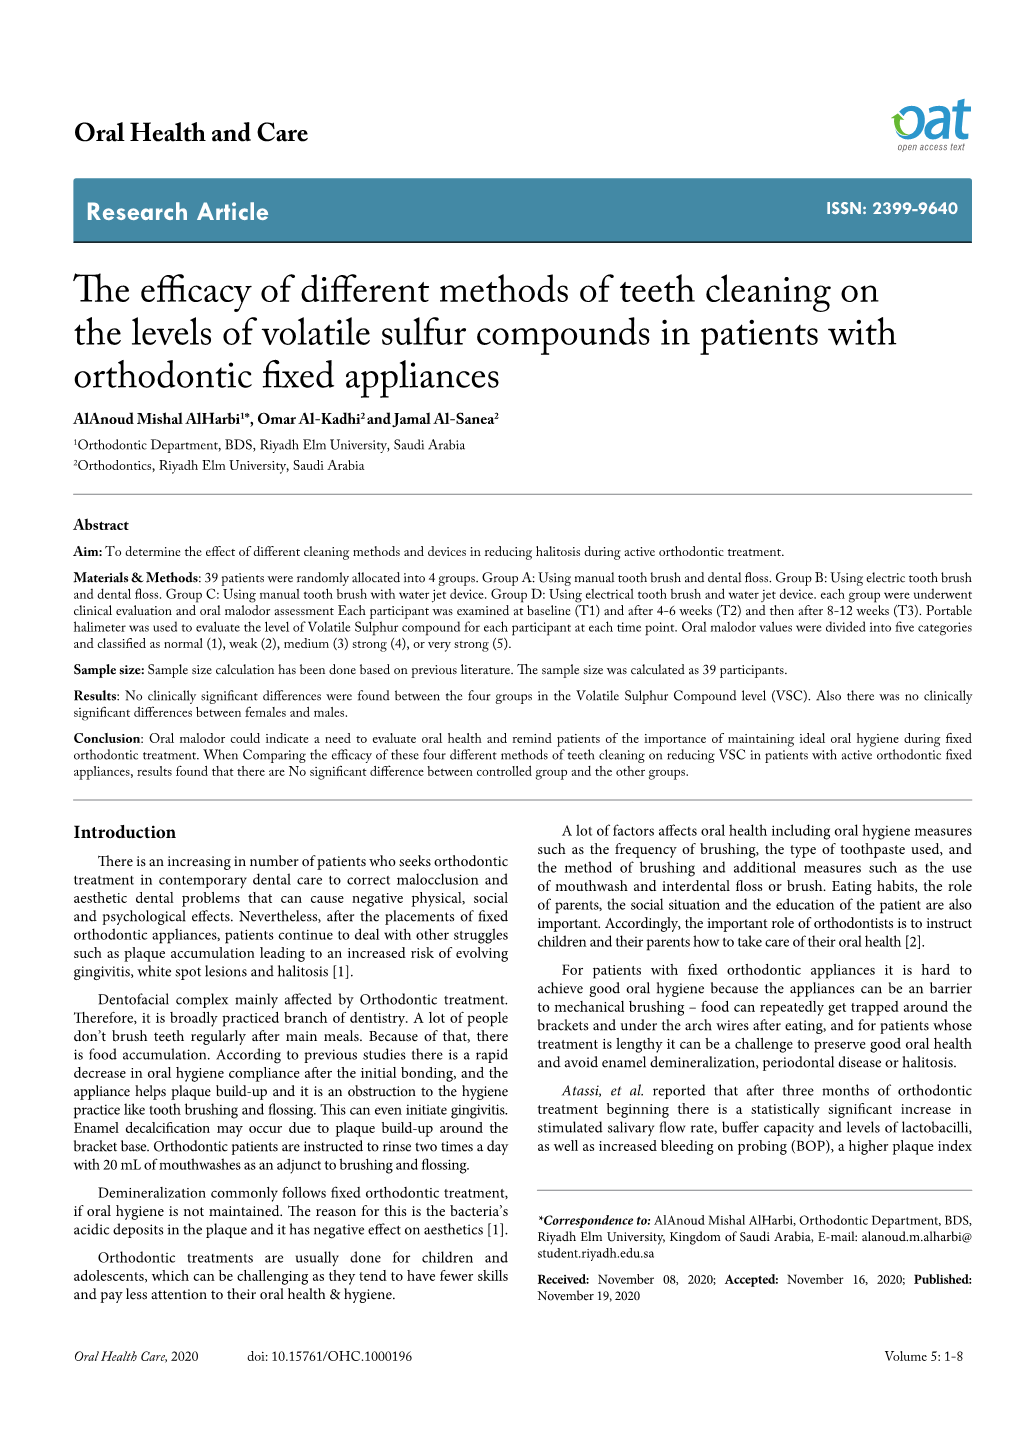 The Efficacy of Different Methods of Teeth Cleaning on the Levels of Volatile Sulfur Compounds in Patients with Orthodontic Fixe